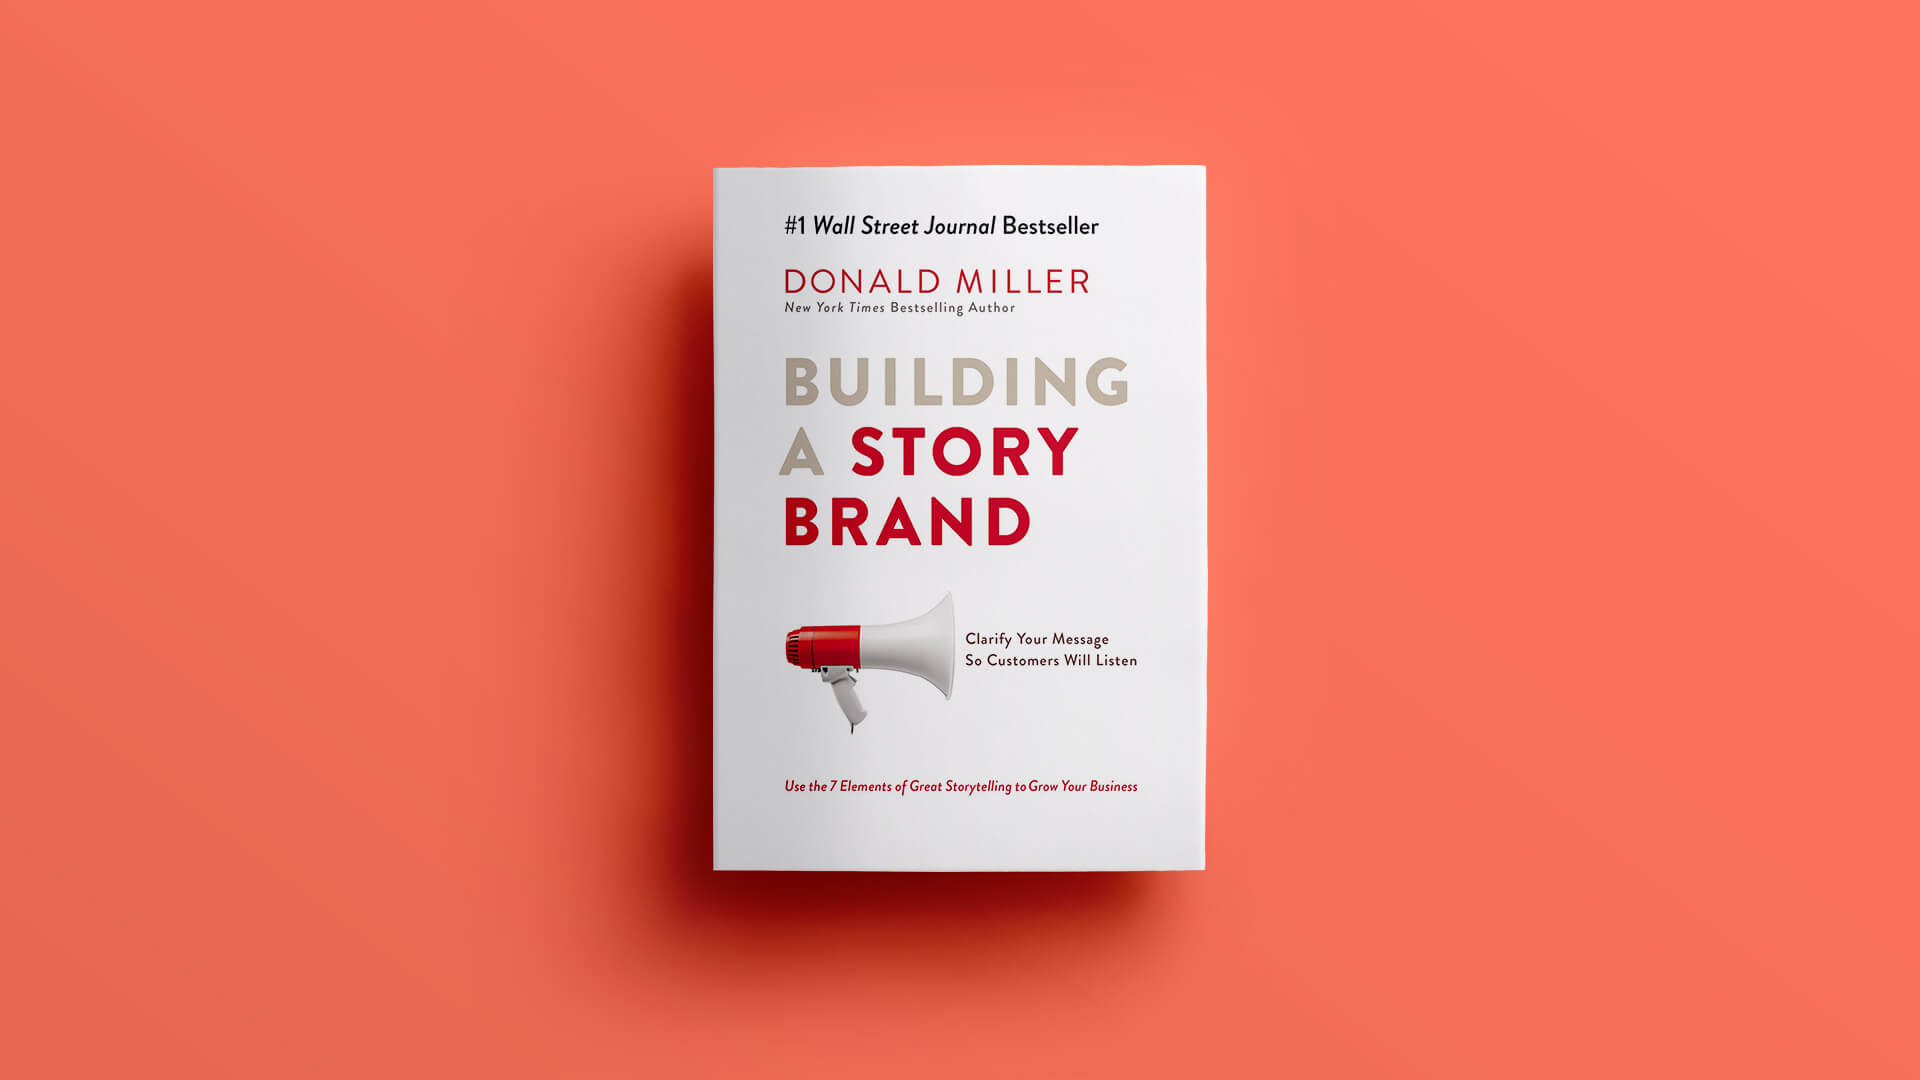 book cover of Donald Miller's "Building A Story Brand"